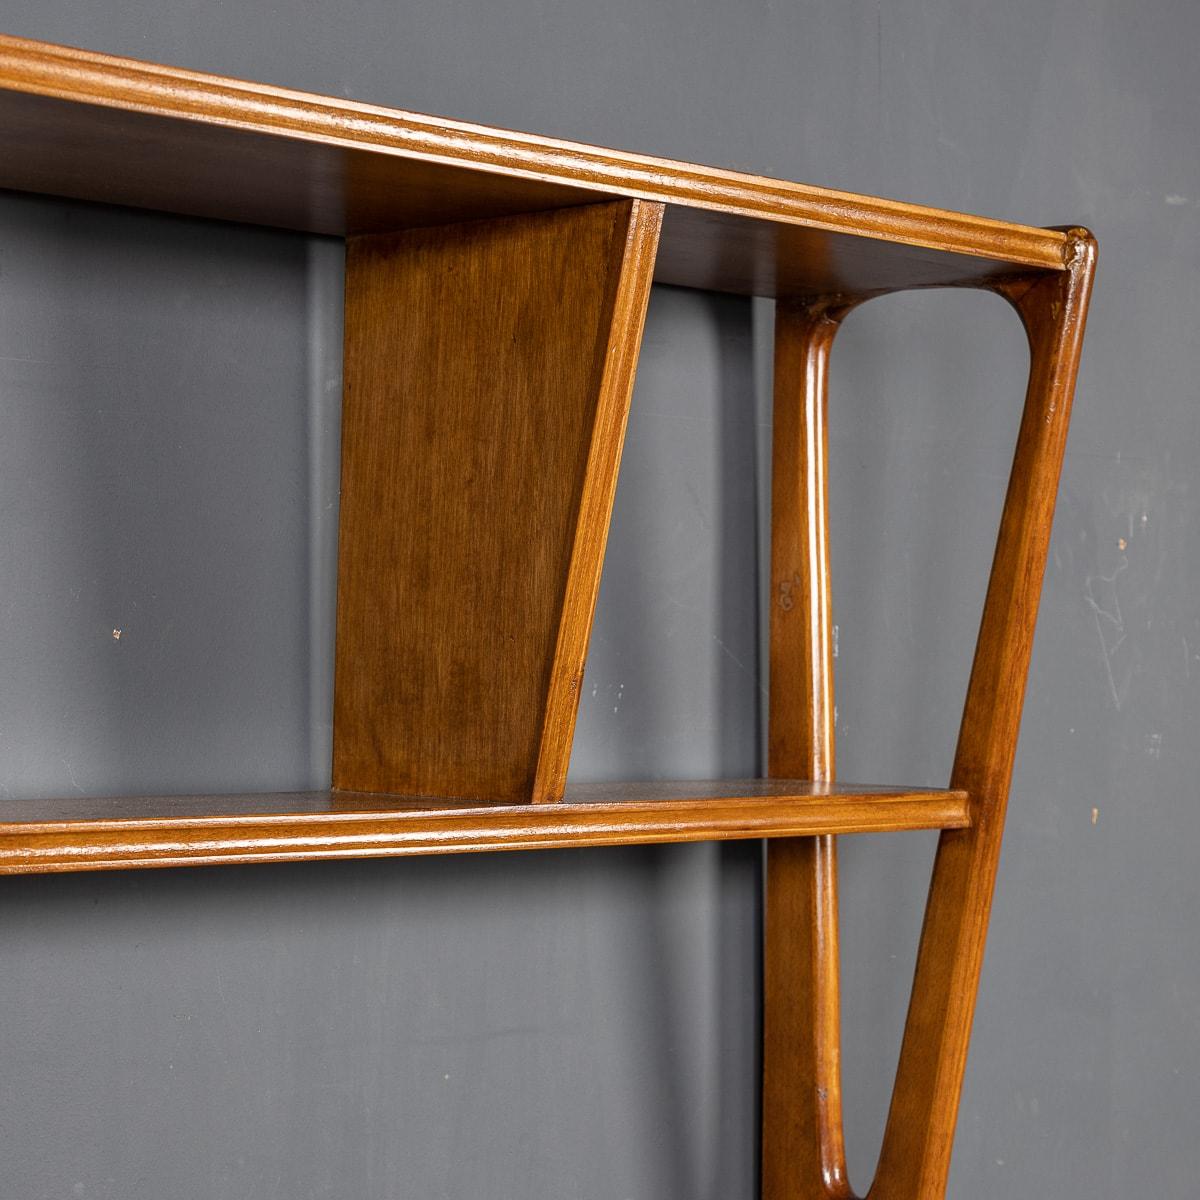 20th Century Italian Beech Wood Bookcase / Room Divider, c.1950 For Sale 4